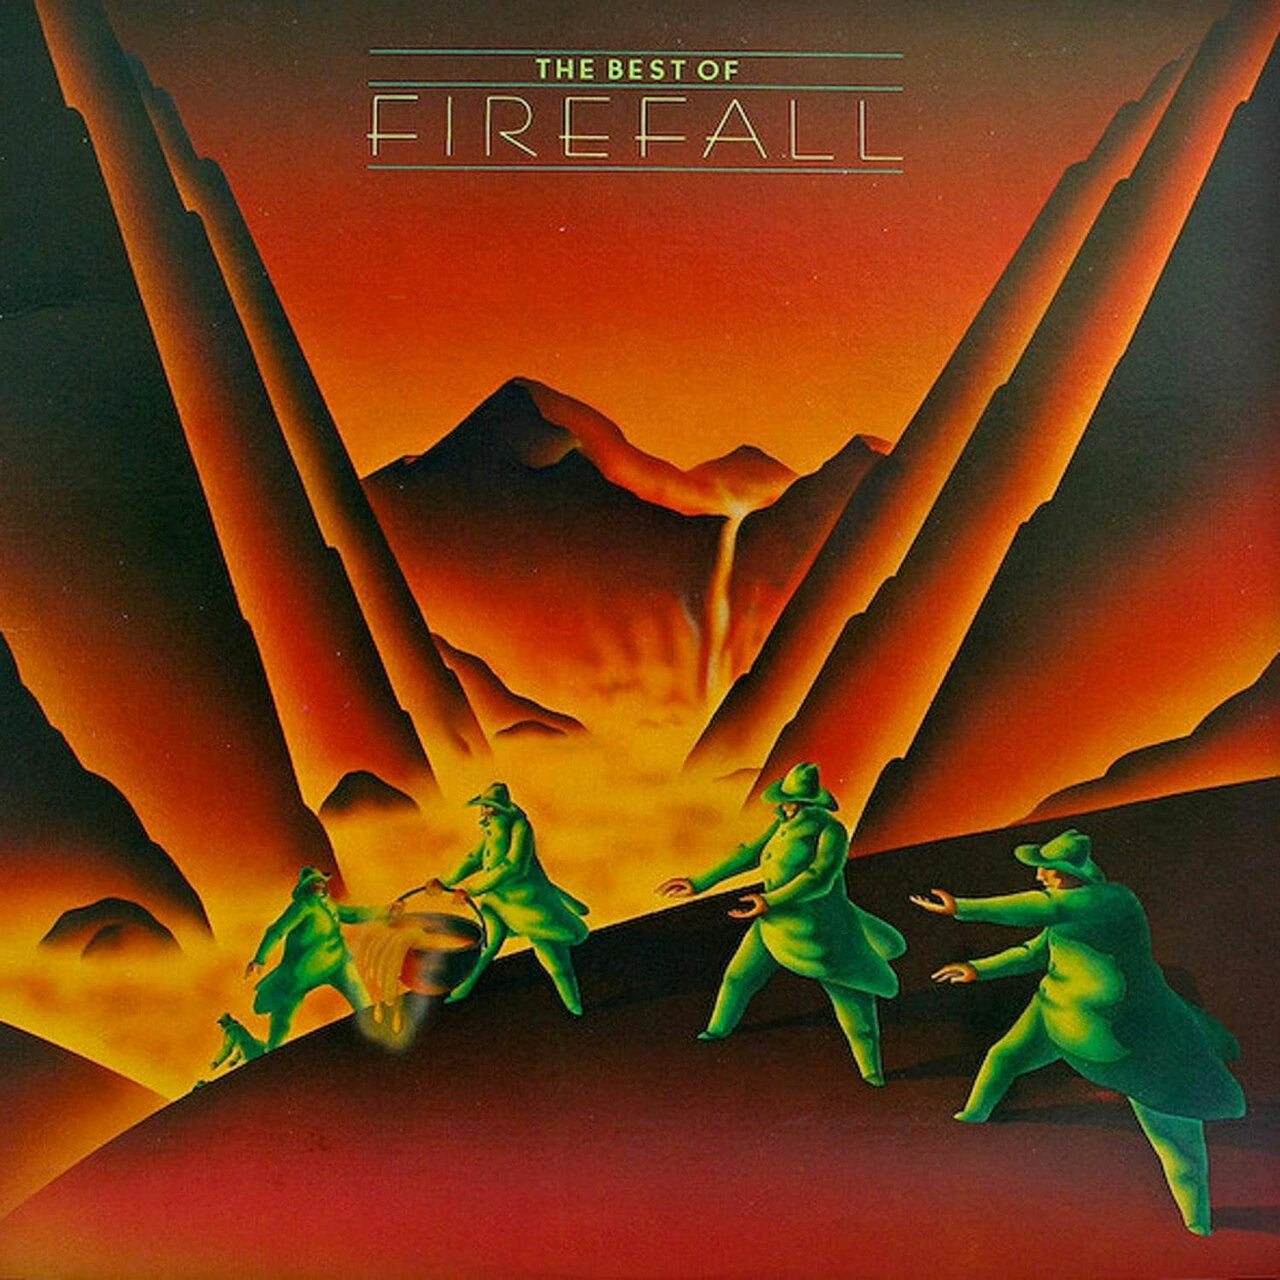 Firefall - The Best Of Firefall [Limited Red Vinyl LP]